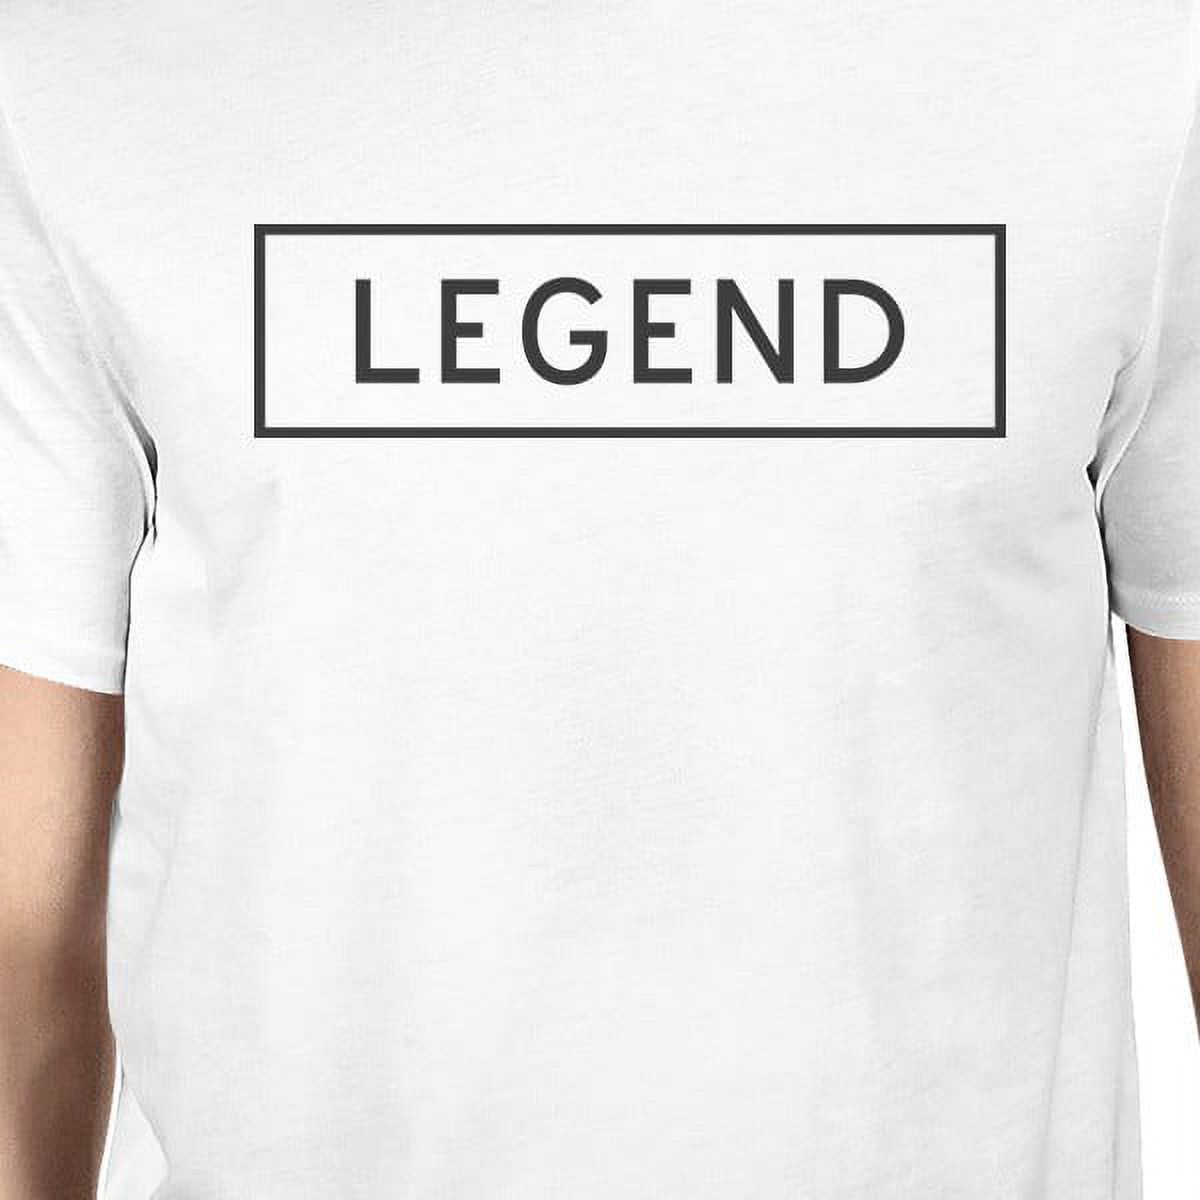 Legend Legacy White Dad Baby Funny Matching Graphic Tops Cute Gifts - image 2 of 5